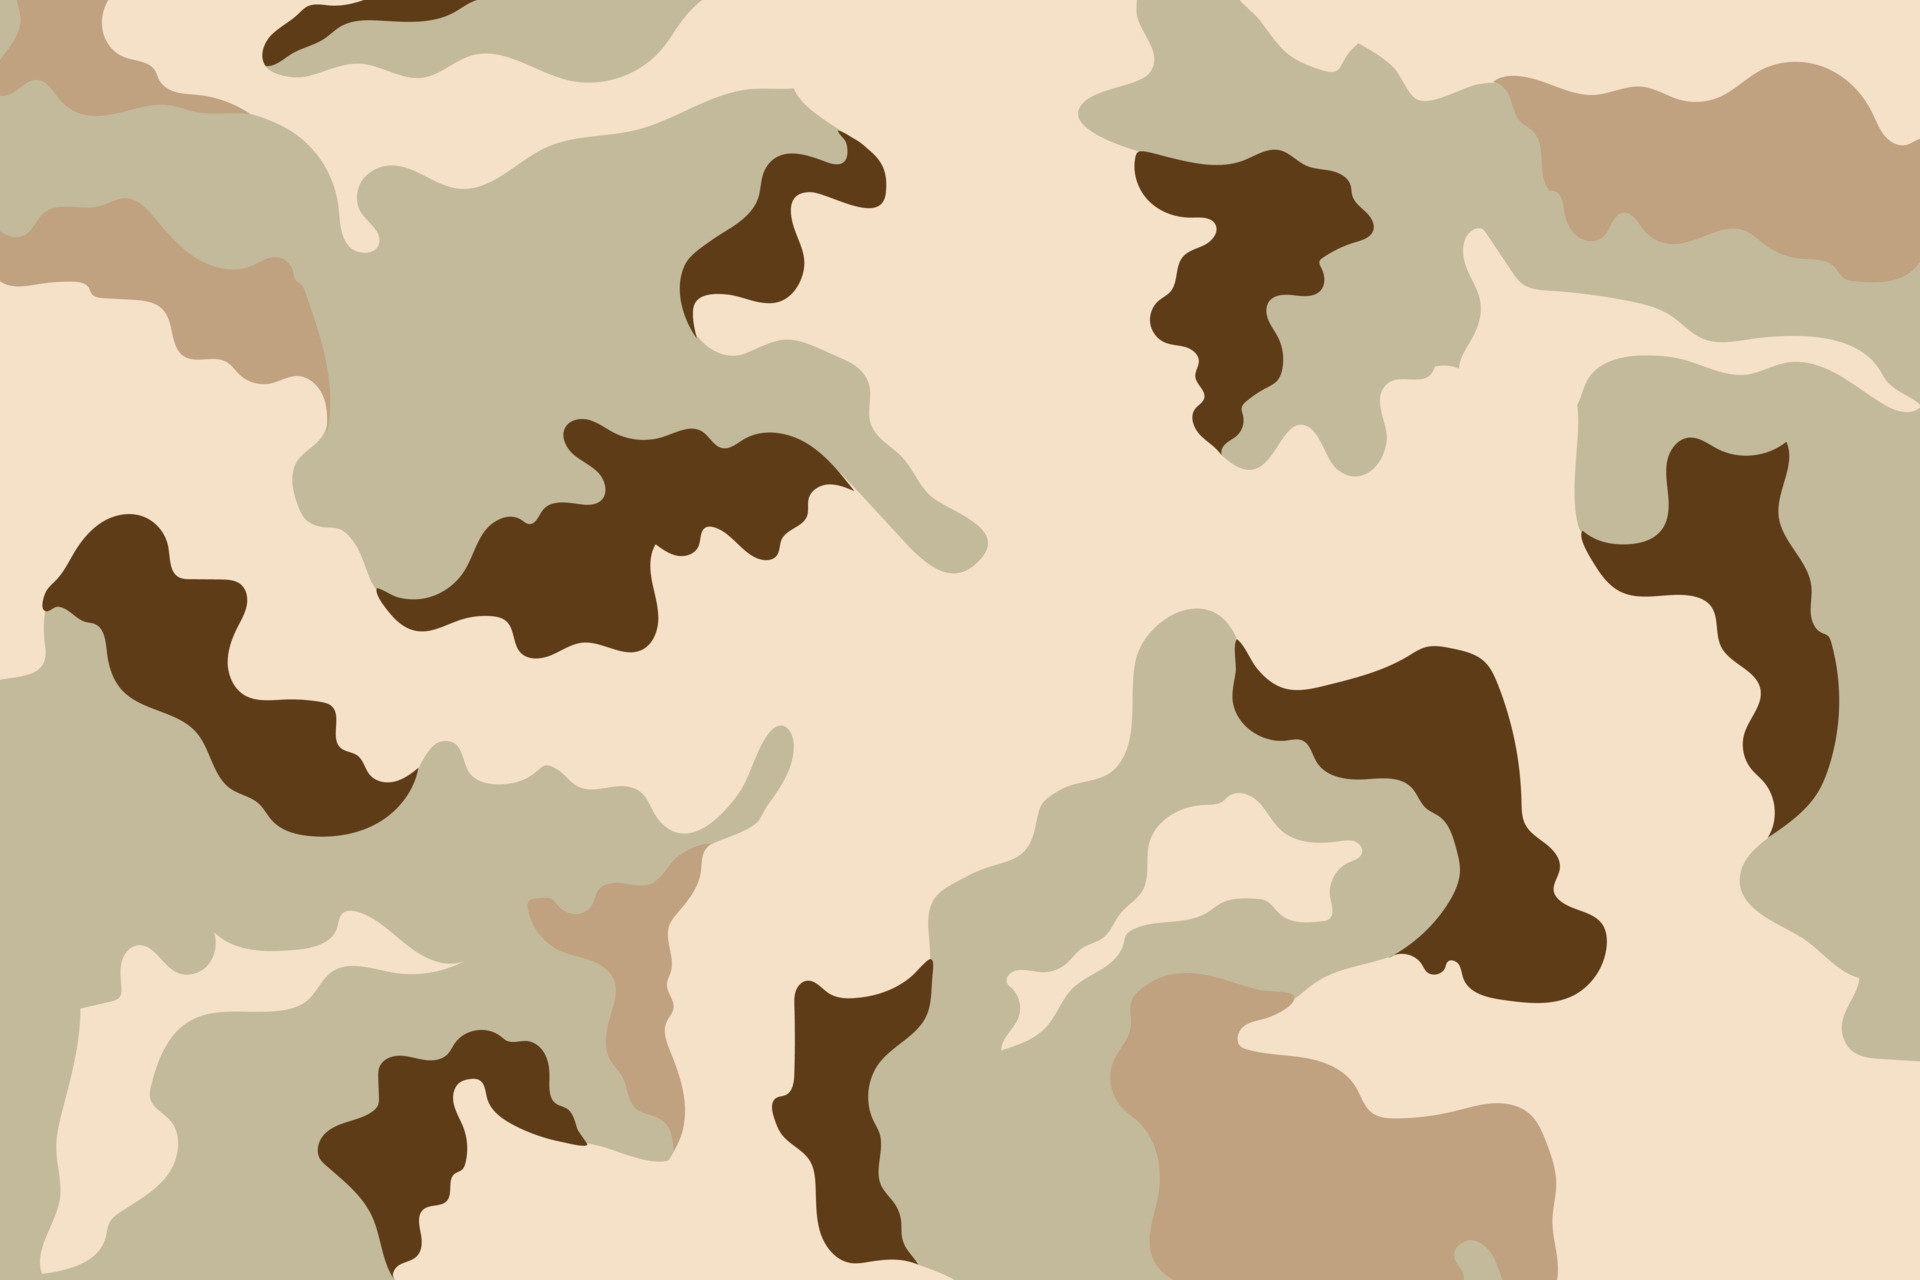 https://static.vecteezy.com/system/resources/previews/013/662/020/original/camouflage-soldier-pattern-design-camo-uniform-desert-printing-clothing-army-soldier-brown-pattern-design-background-illustration-vector.jpg